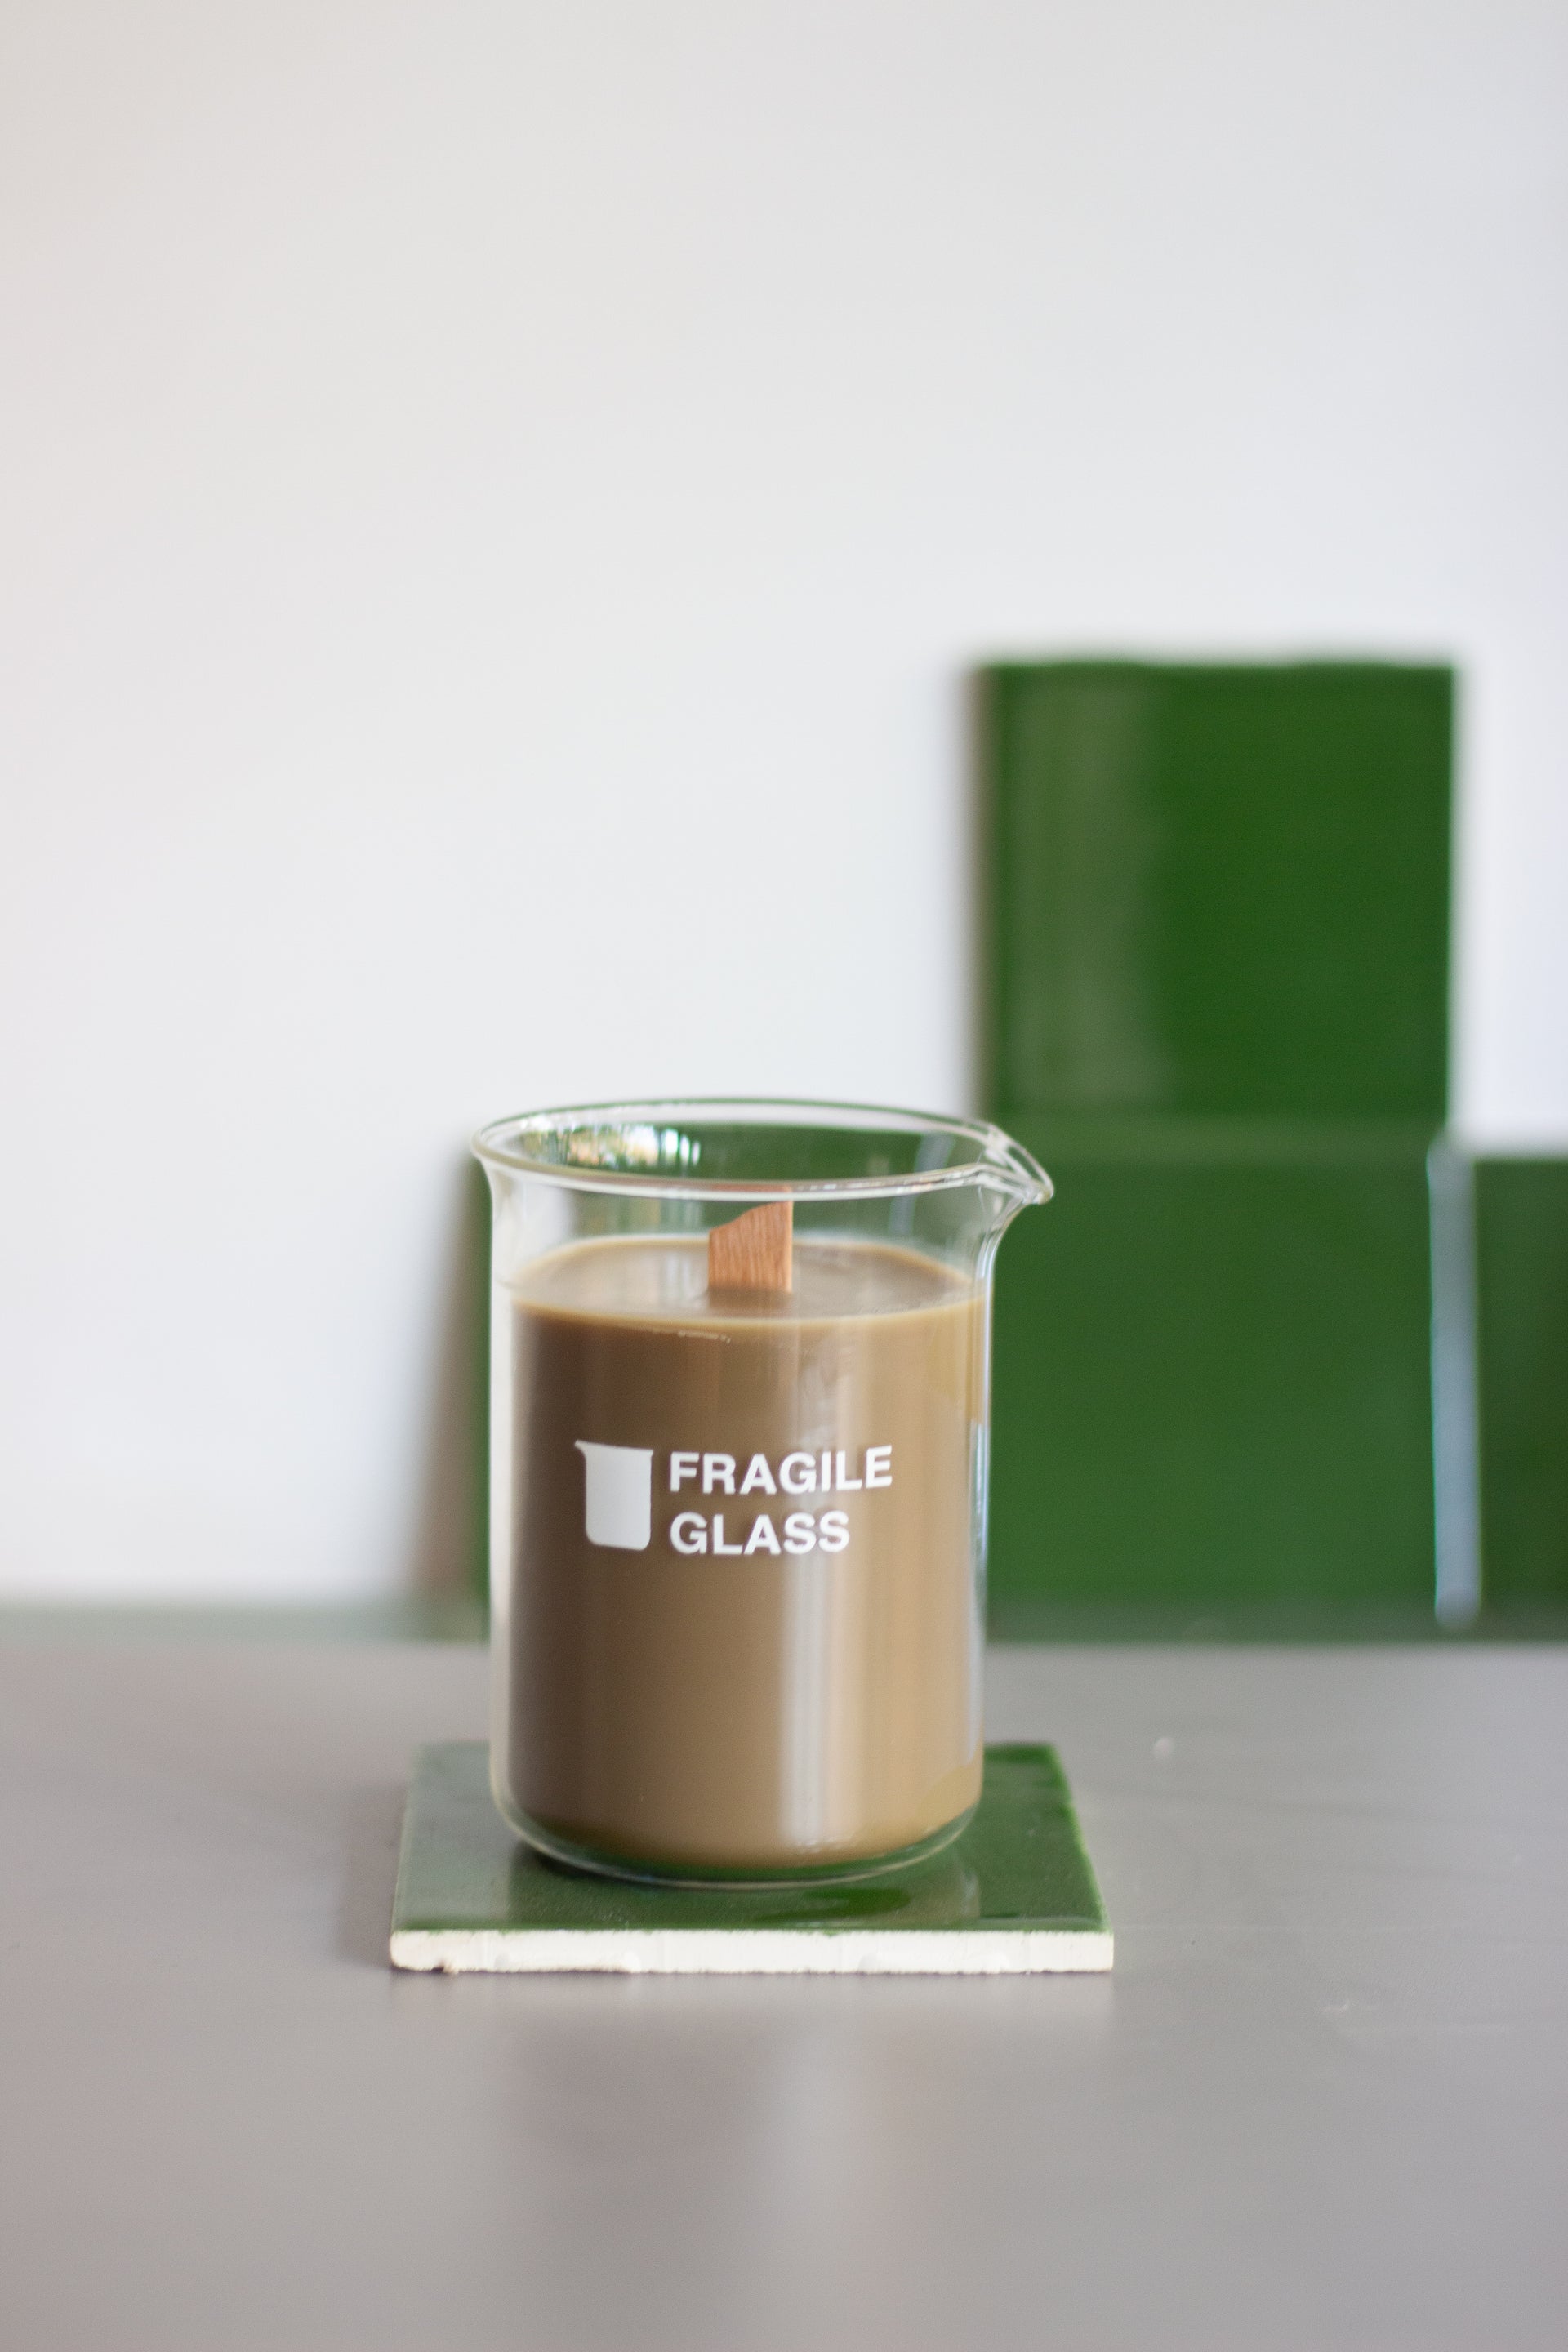 FRAGILE GLASS 'WOODWARD' CANDLE